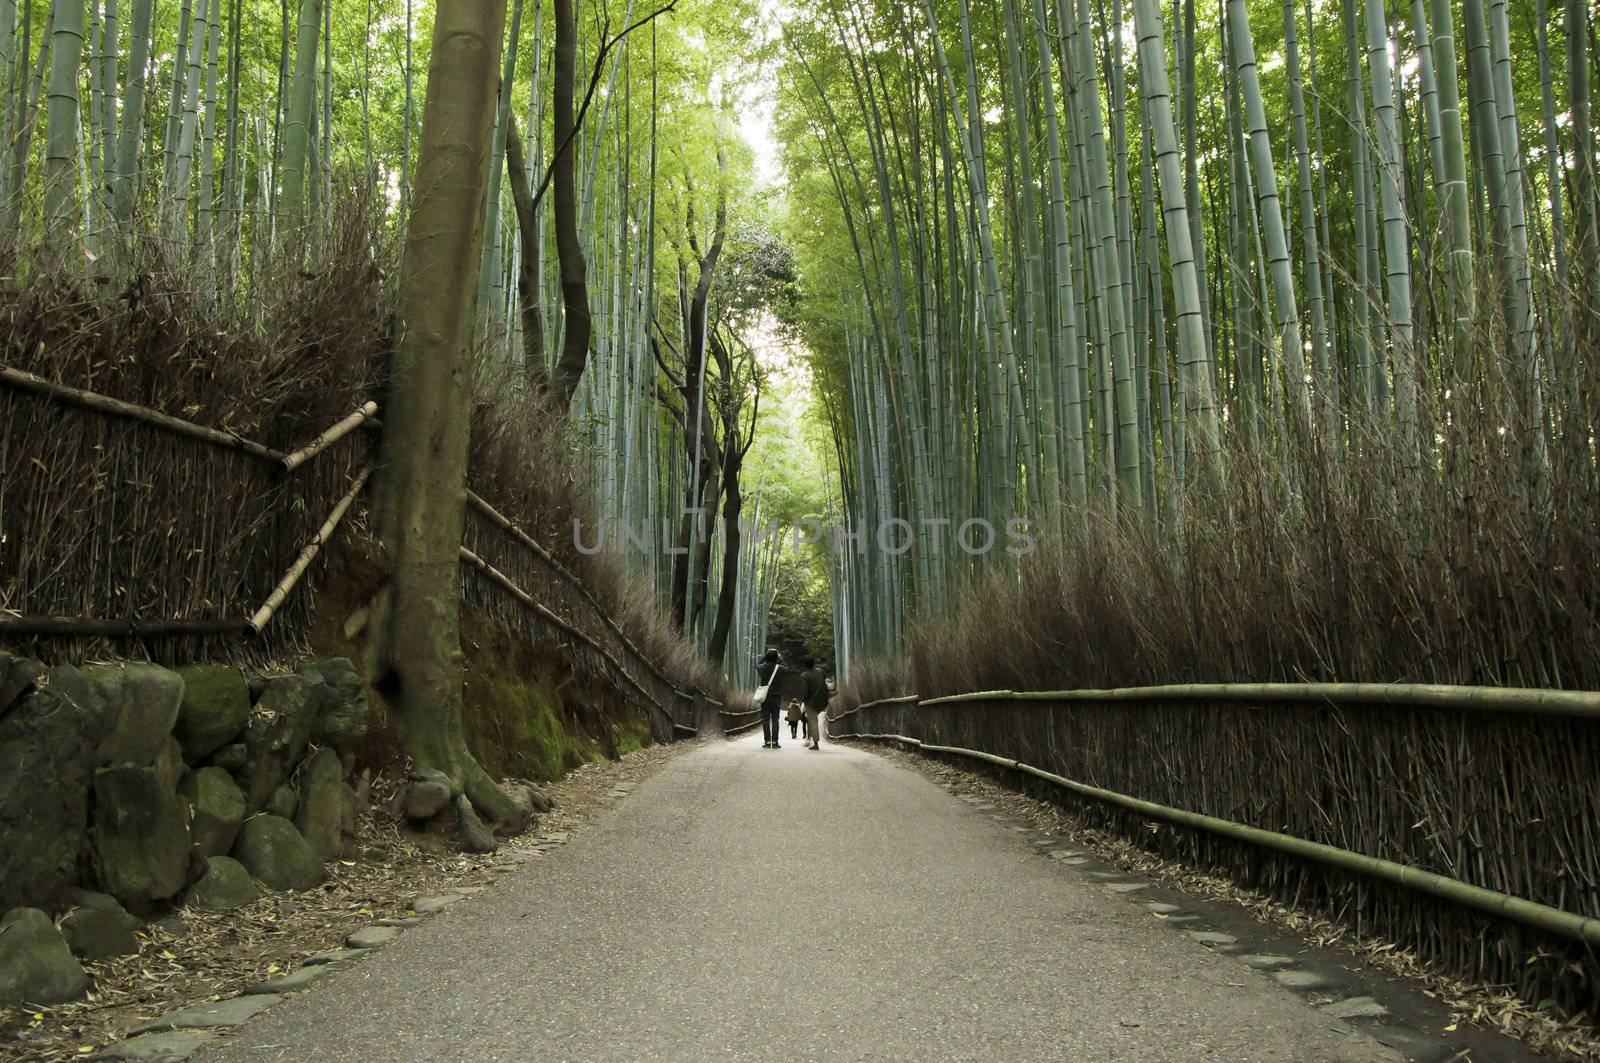 Bamboo grove in Arashiyama in Kyoto, Japan near the famous Tenryu-ji temple. Tenryuji is a Zen Buddhist temple which means temple of the heavenly dragon and is a World Cultural Heritage Site. 